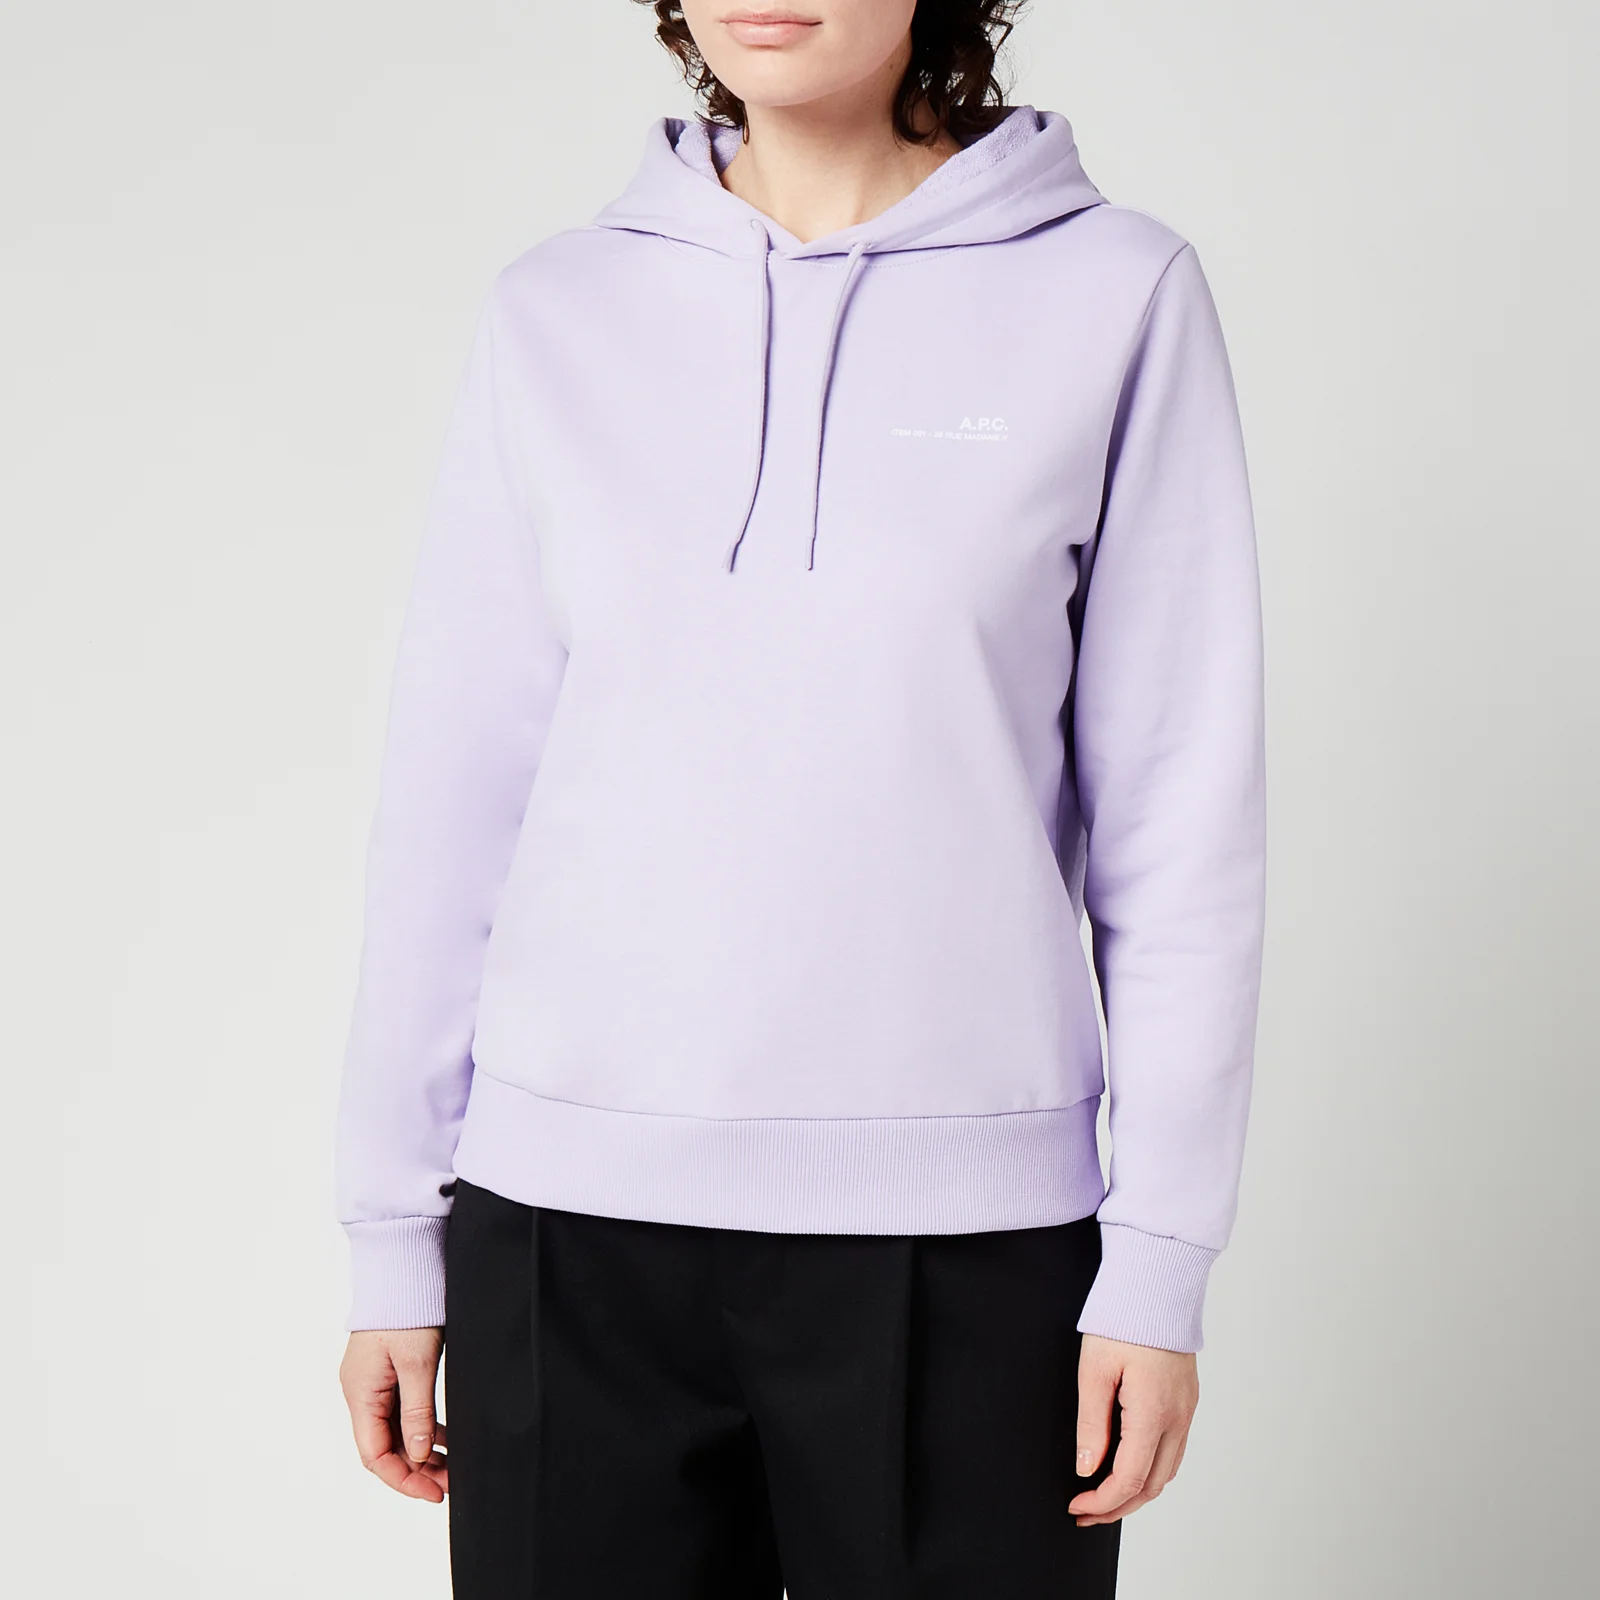 A.P.C. Women's Small Logo Hooded Top - Violet Image 1